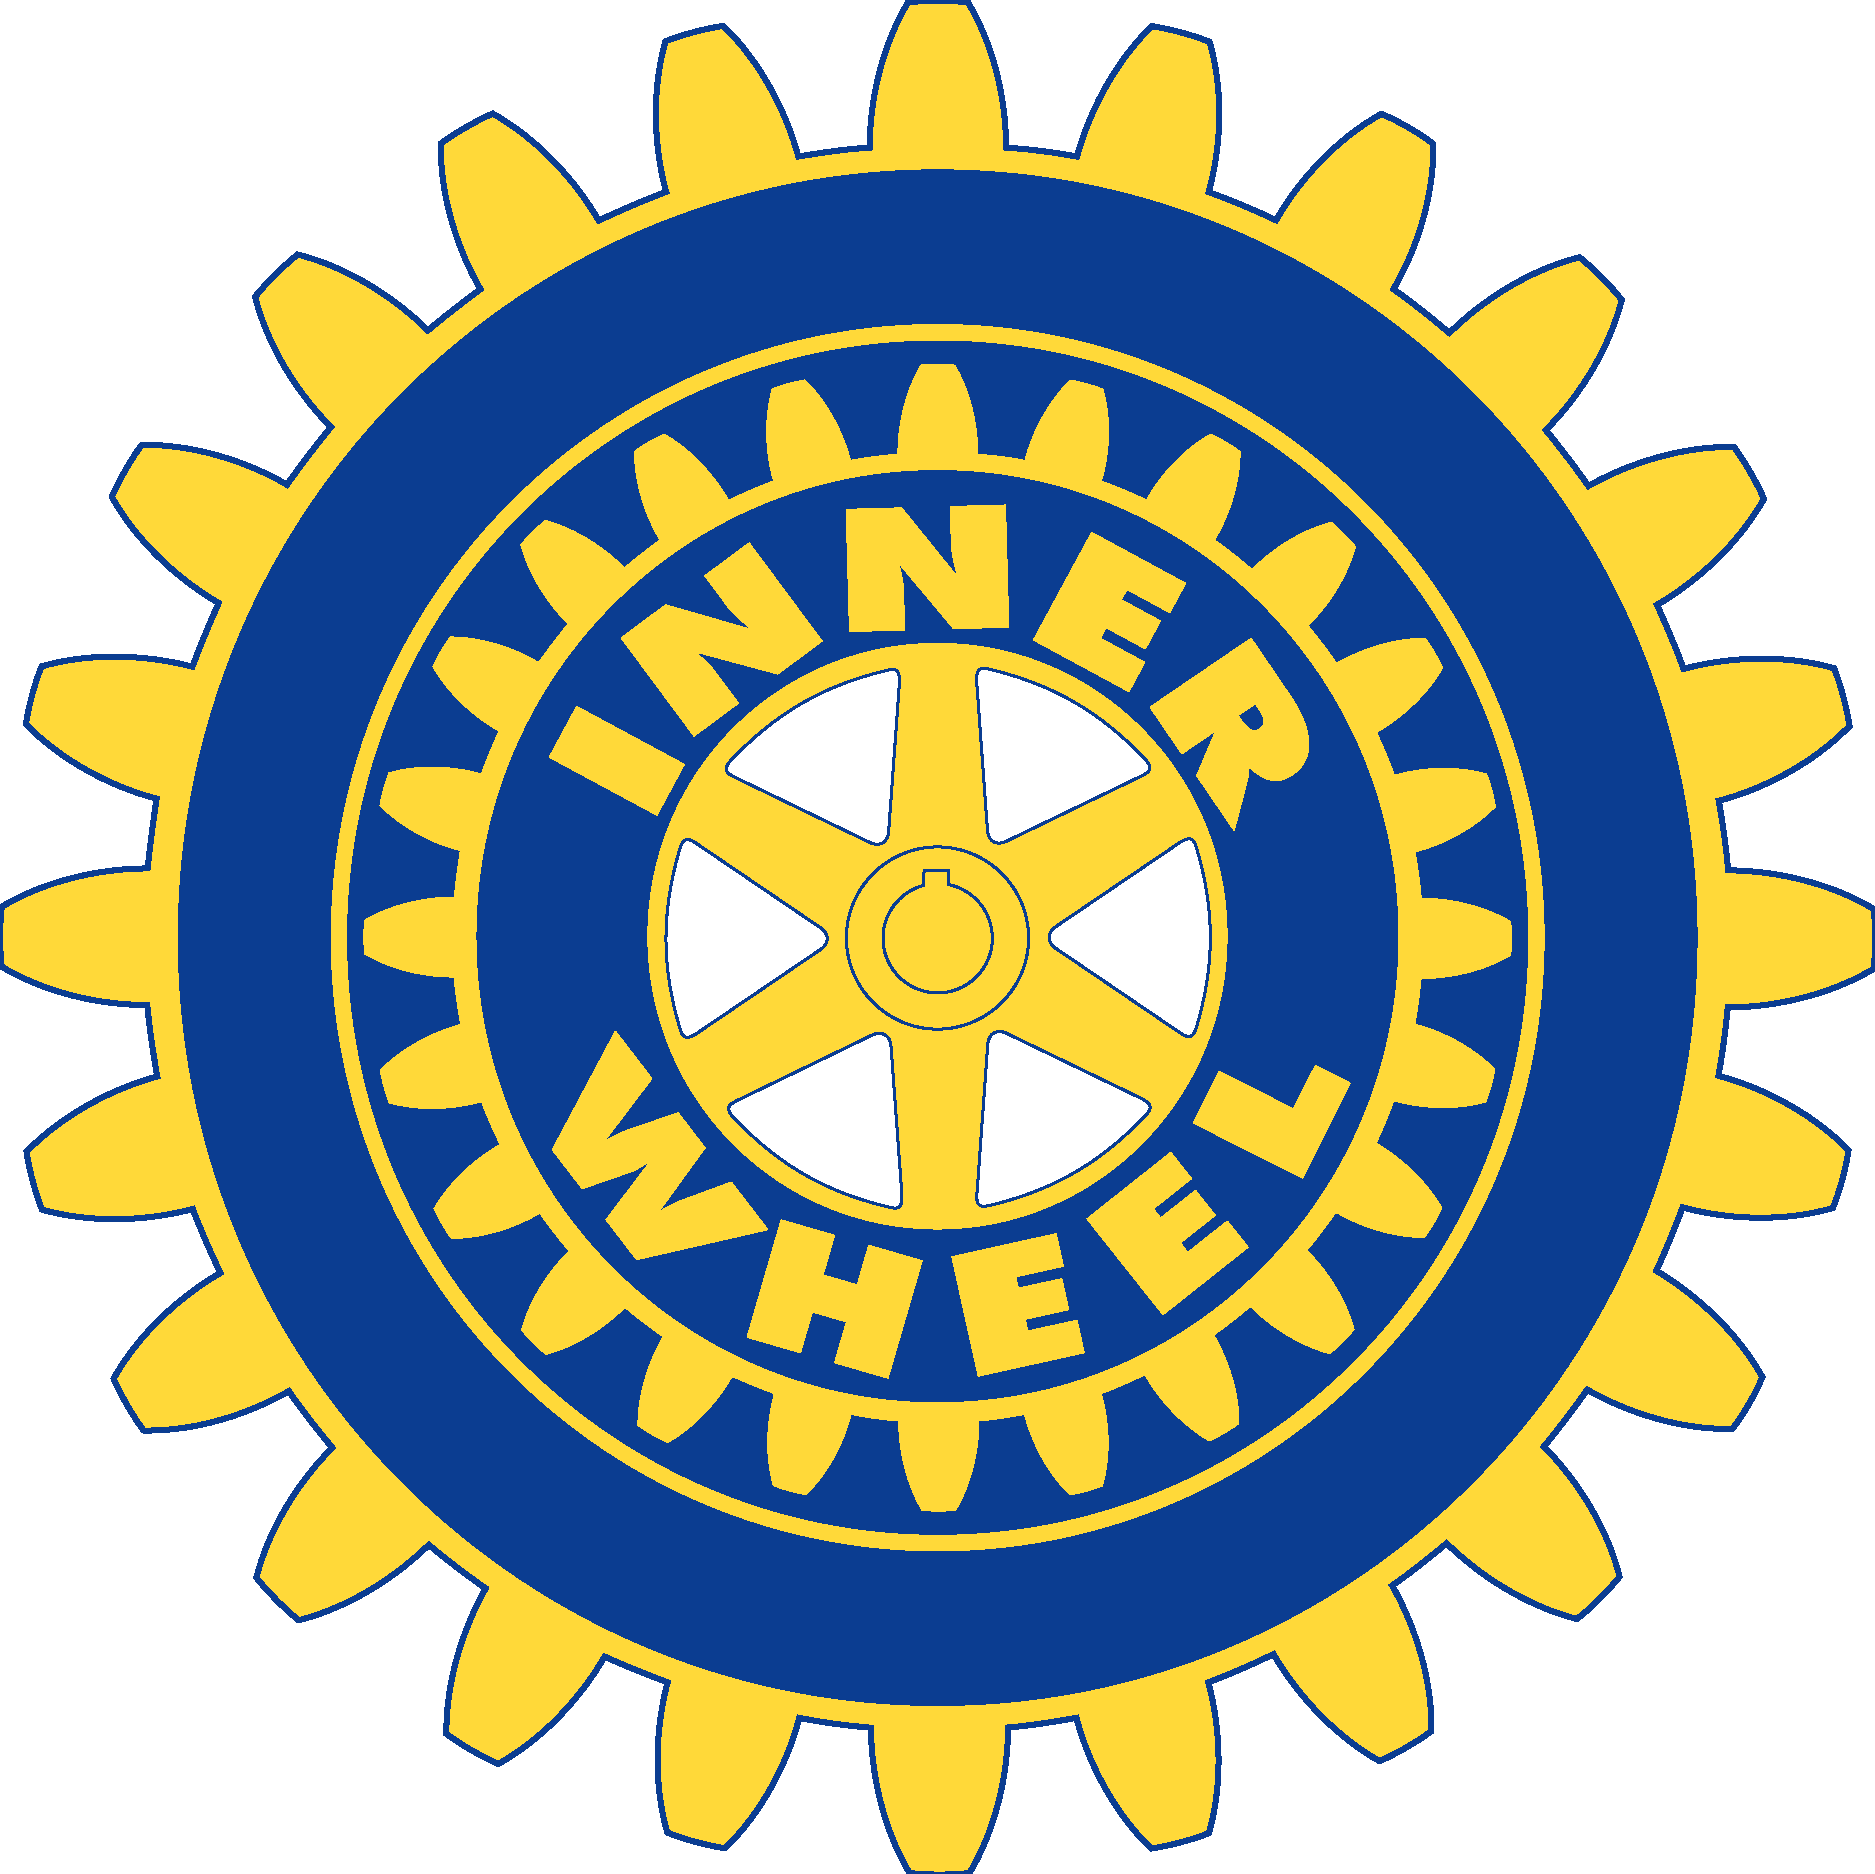 Inner Wheel Club of Thame - Thame Town Council